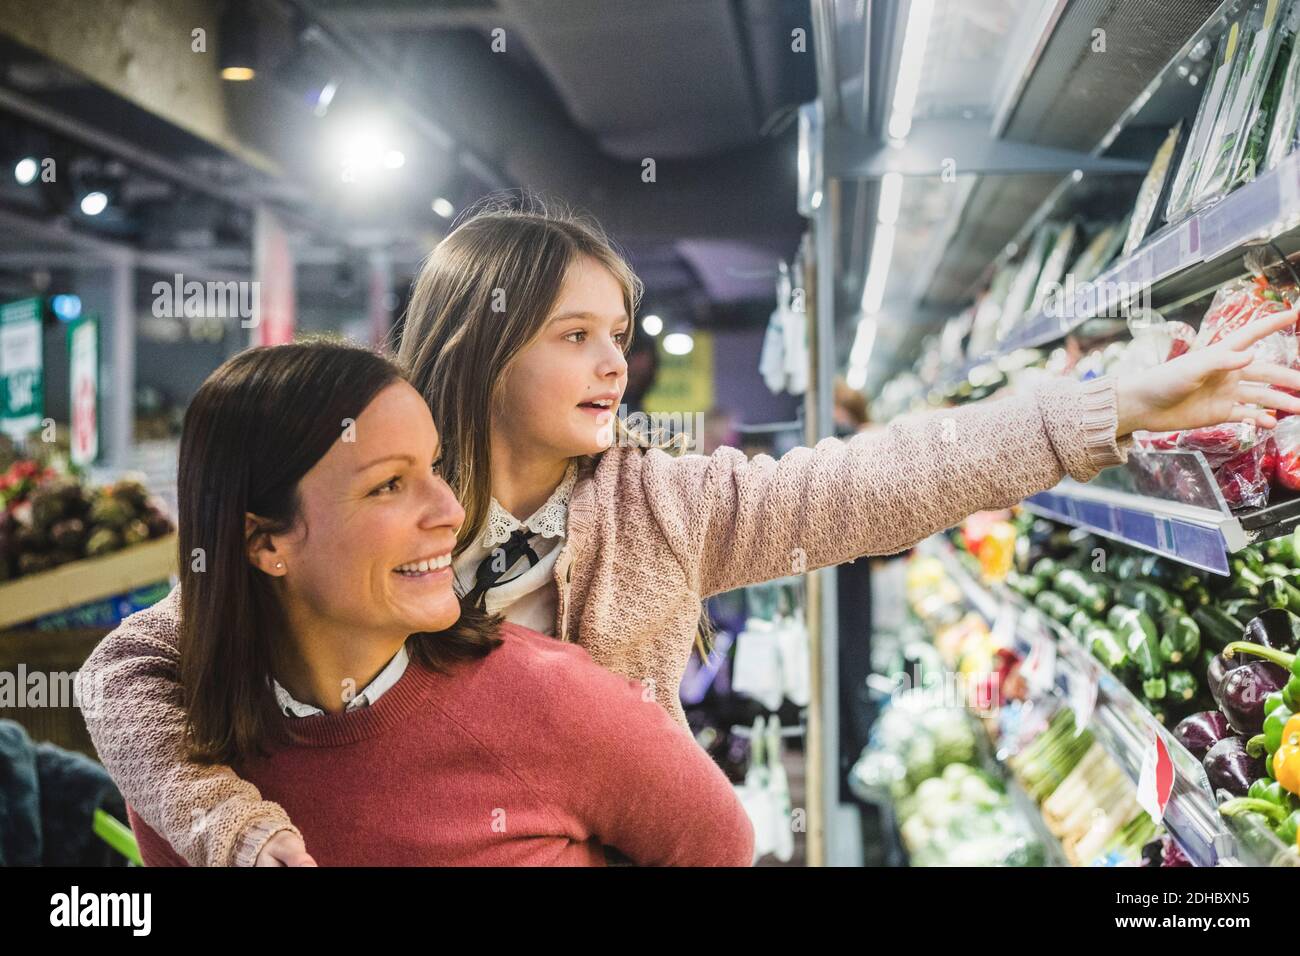 Smiling mother piggybacking daughter while grocery shopping in supermarket Stock Photo